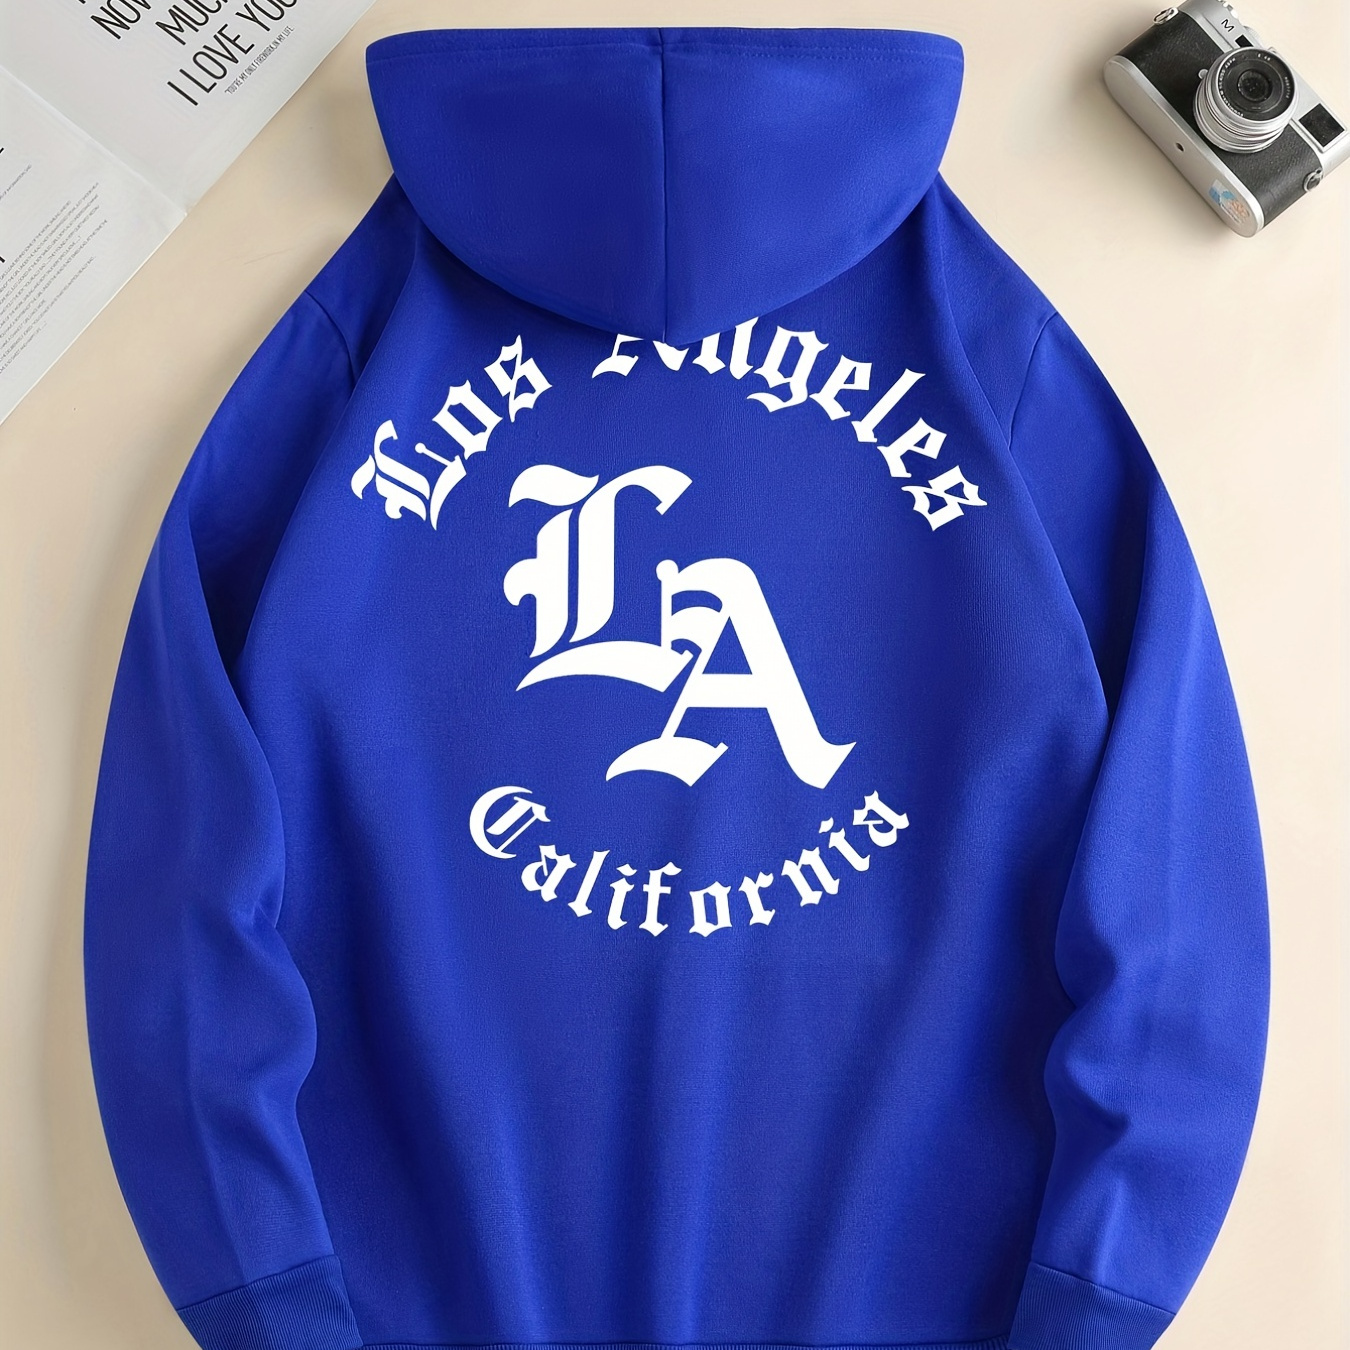 

La California Print Hoodie, Hoodies For Men, Men's Casual Graphic Design Pullover Hooded Sweatshirt With Kangaroo Pocket For Spring Fall, As Gifts